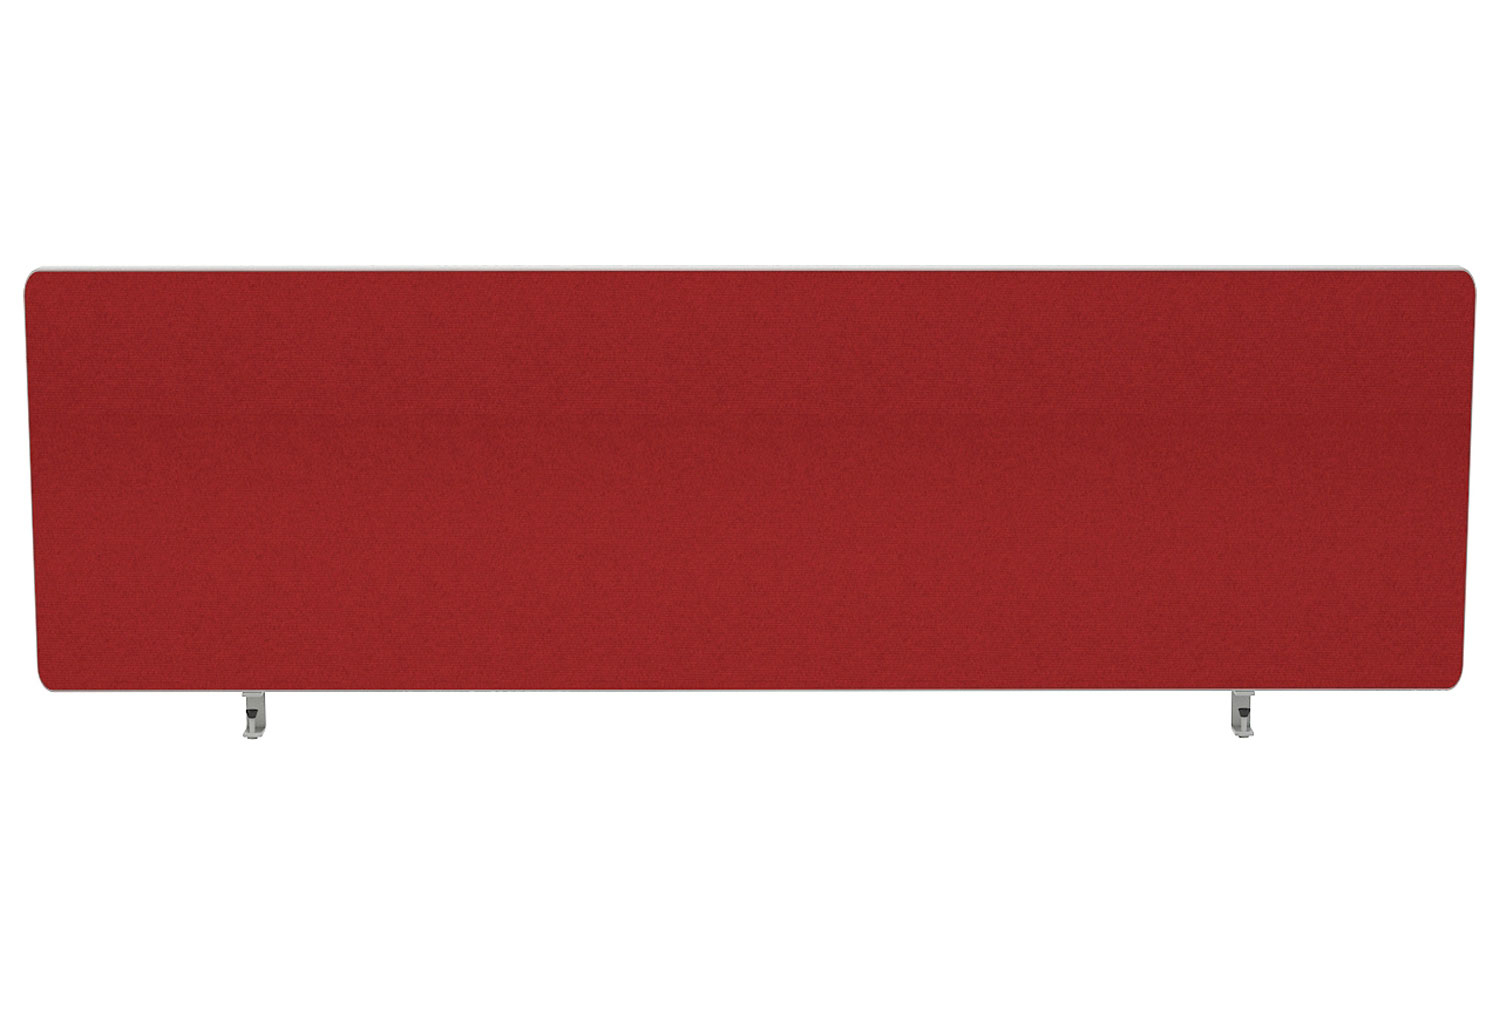 Griffin Rectangular Desktop Office Screens With Rounded Corners, 160wx2dx40h (cm), Burgundy